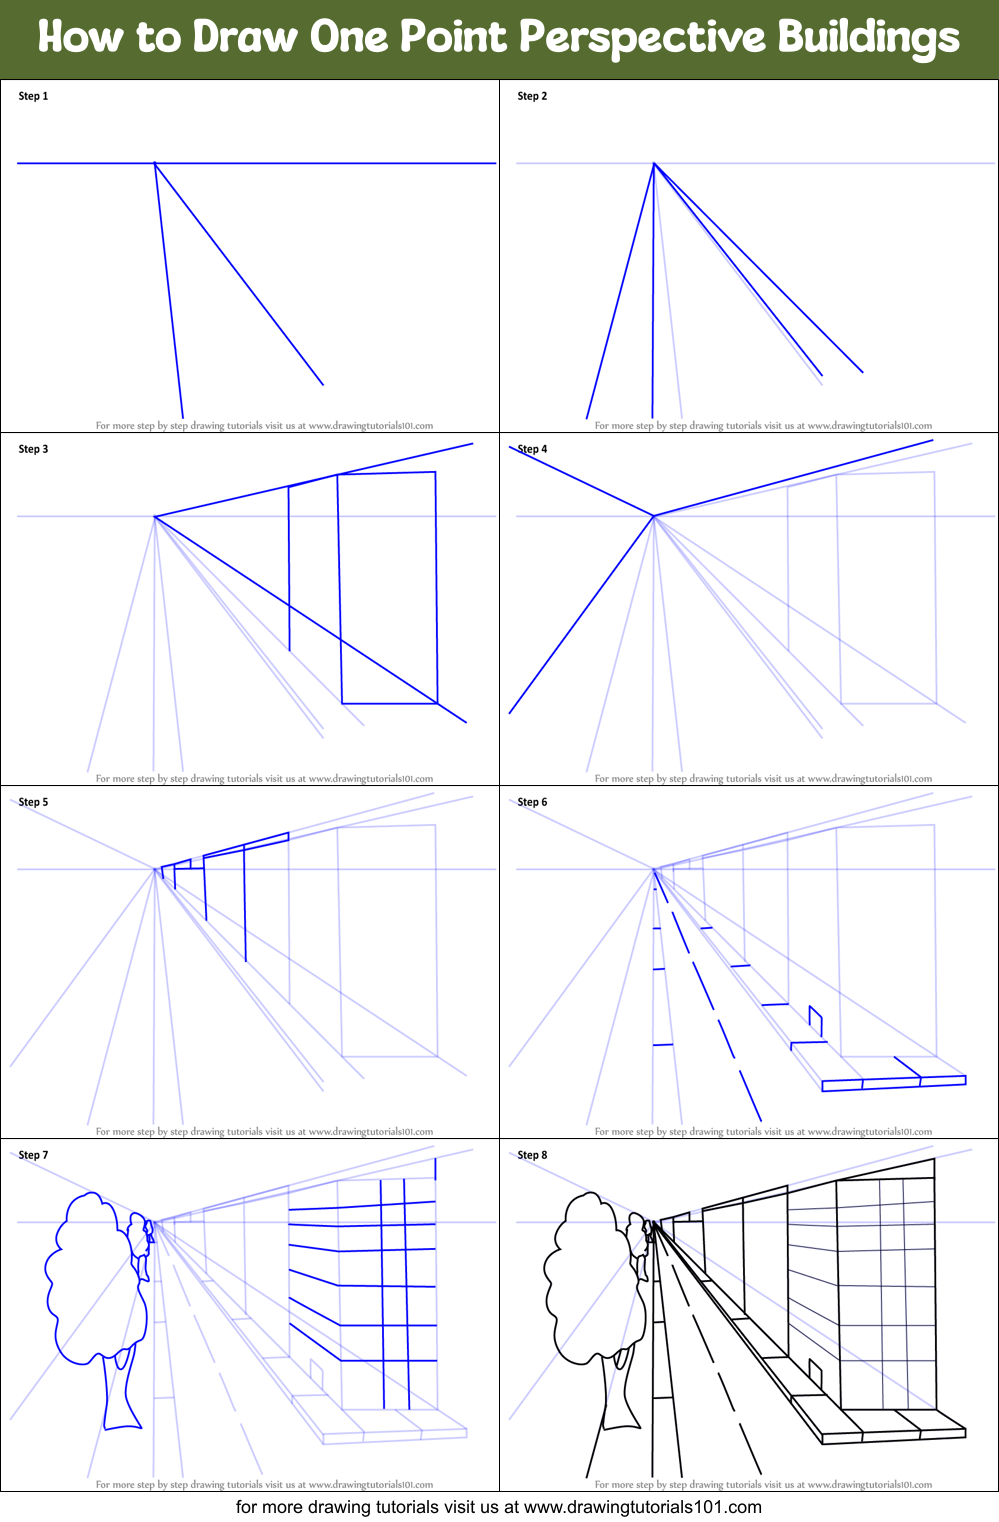 How to Draw One Point Perspective Buildings step by step